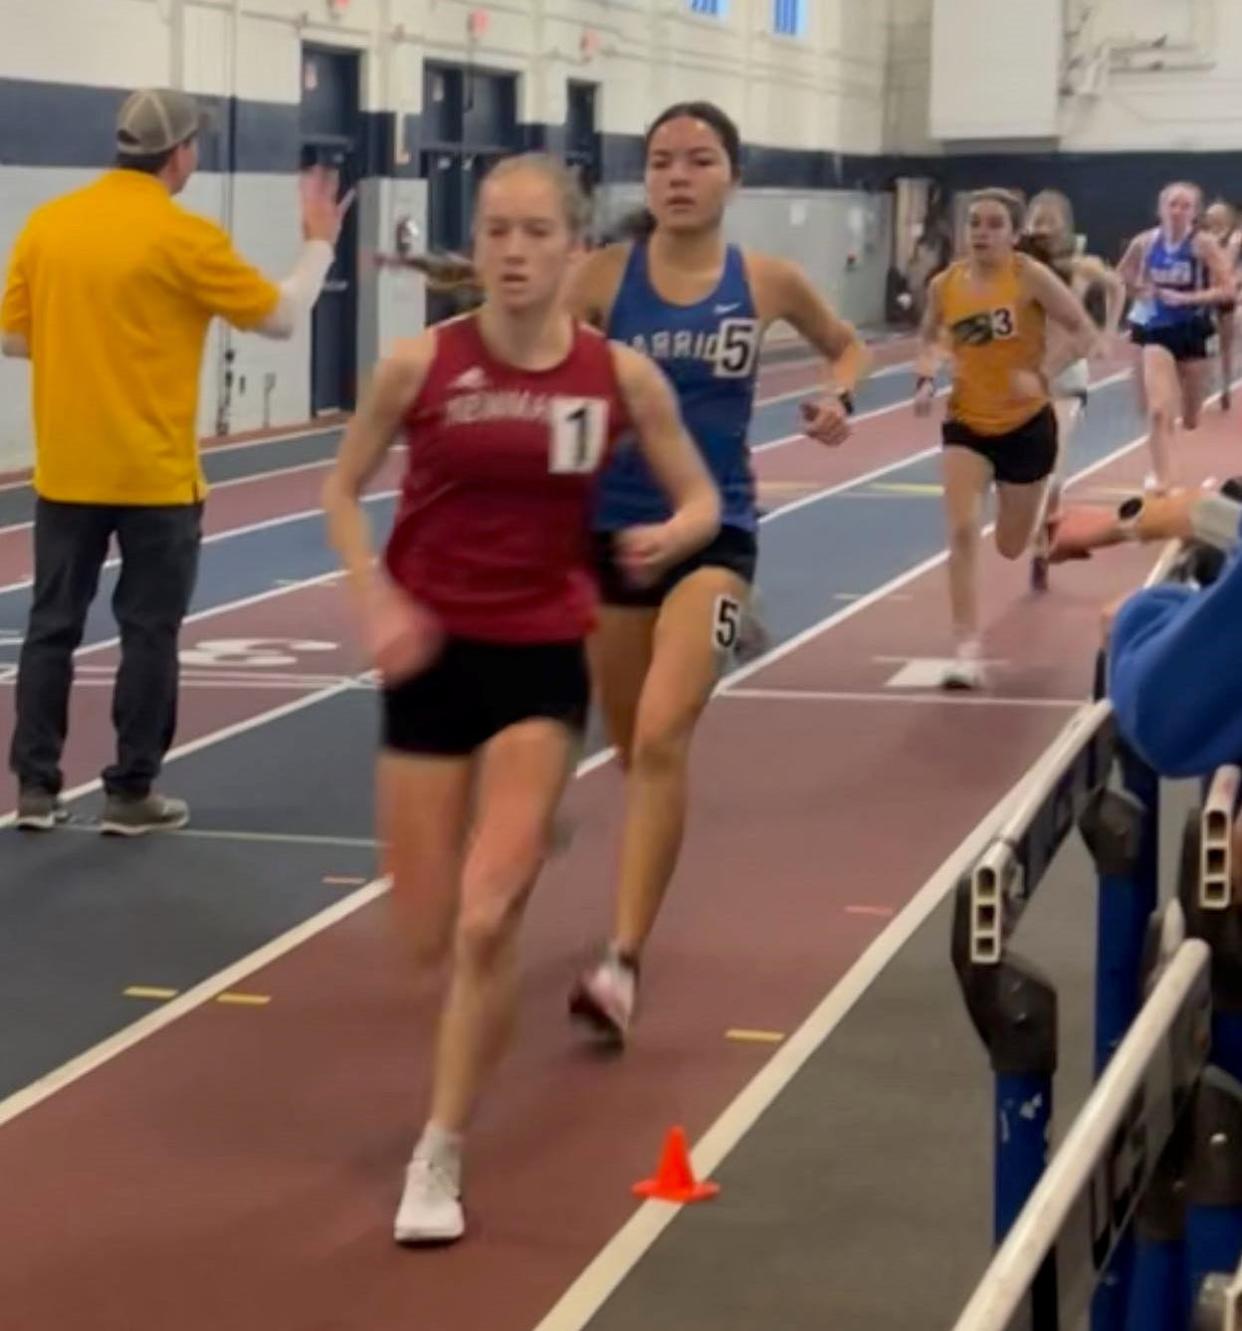 Winnacunnet senior Charlotte Koutalidis trails Newmarket's Alison Hagen in Saturday's 1,000-meter race at an open qualifier meet at the University of New Hampshire. Koutalidis set a Winnacunnet school record with a time of 3 minutes, 03.35 seconds.